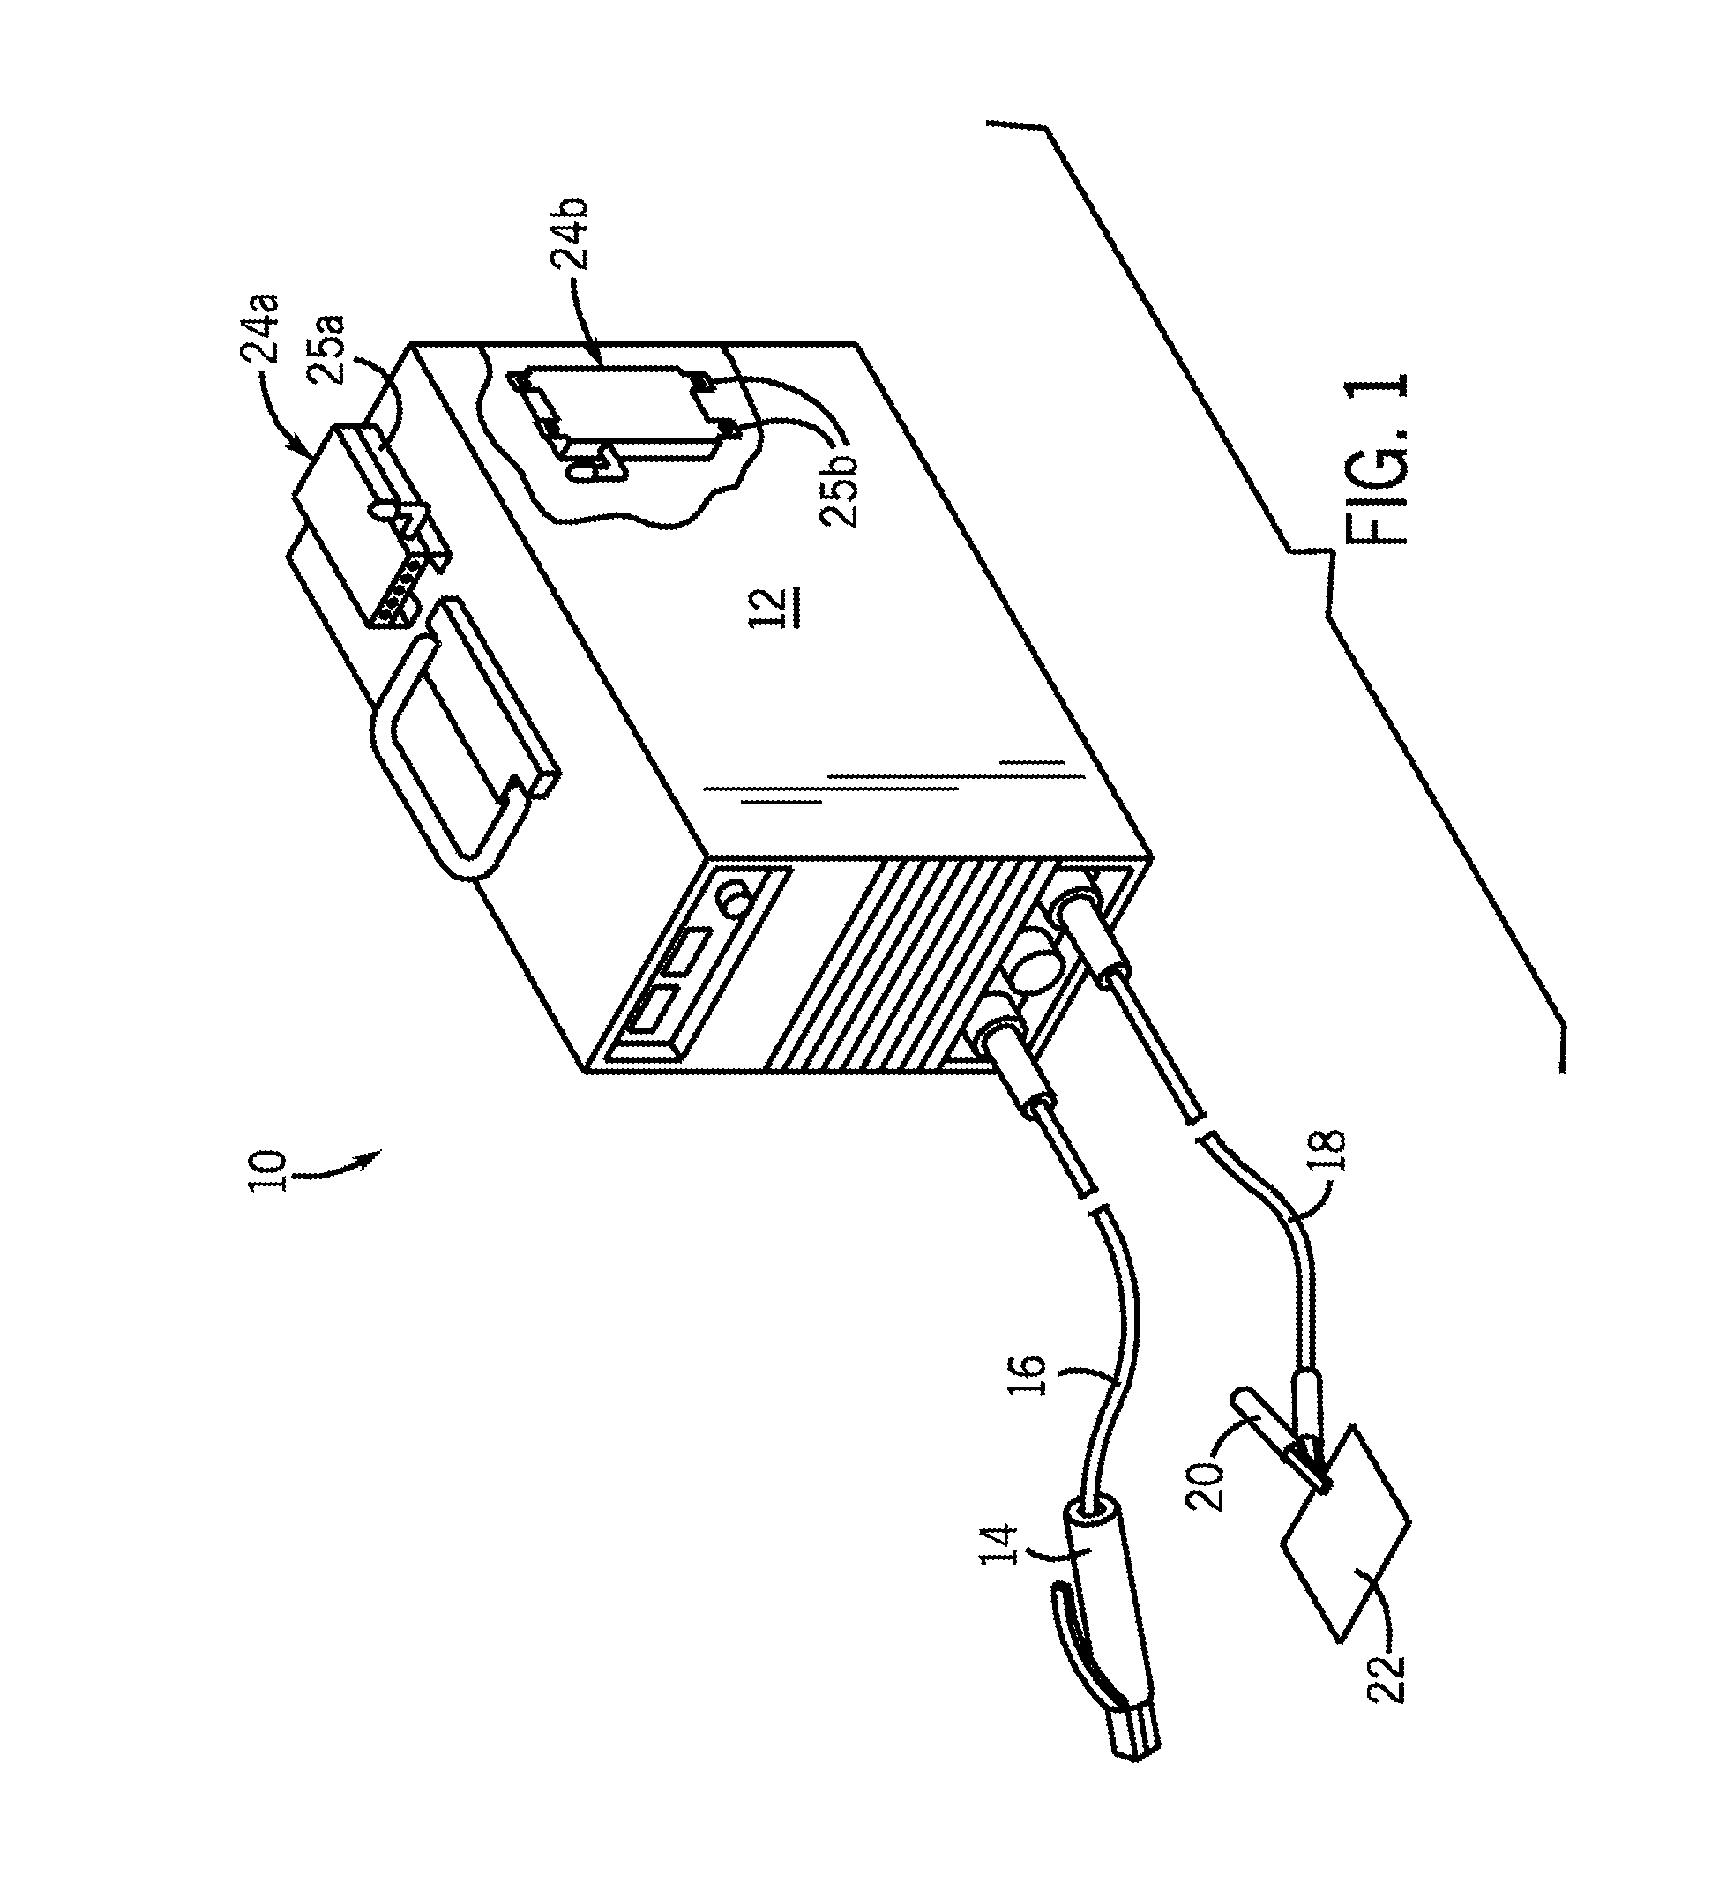 Wireless communication system for welding-type devices